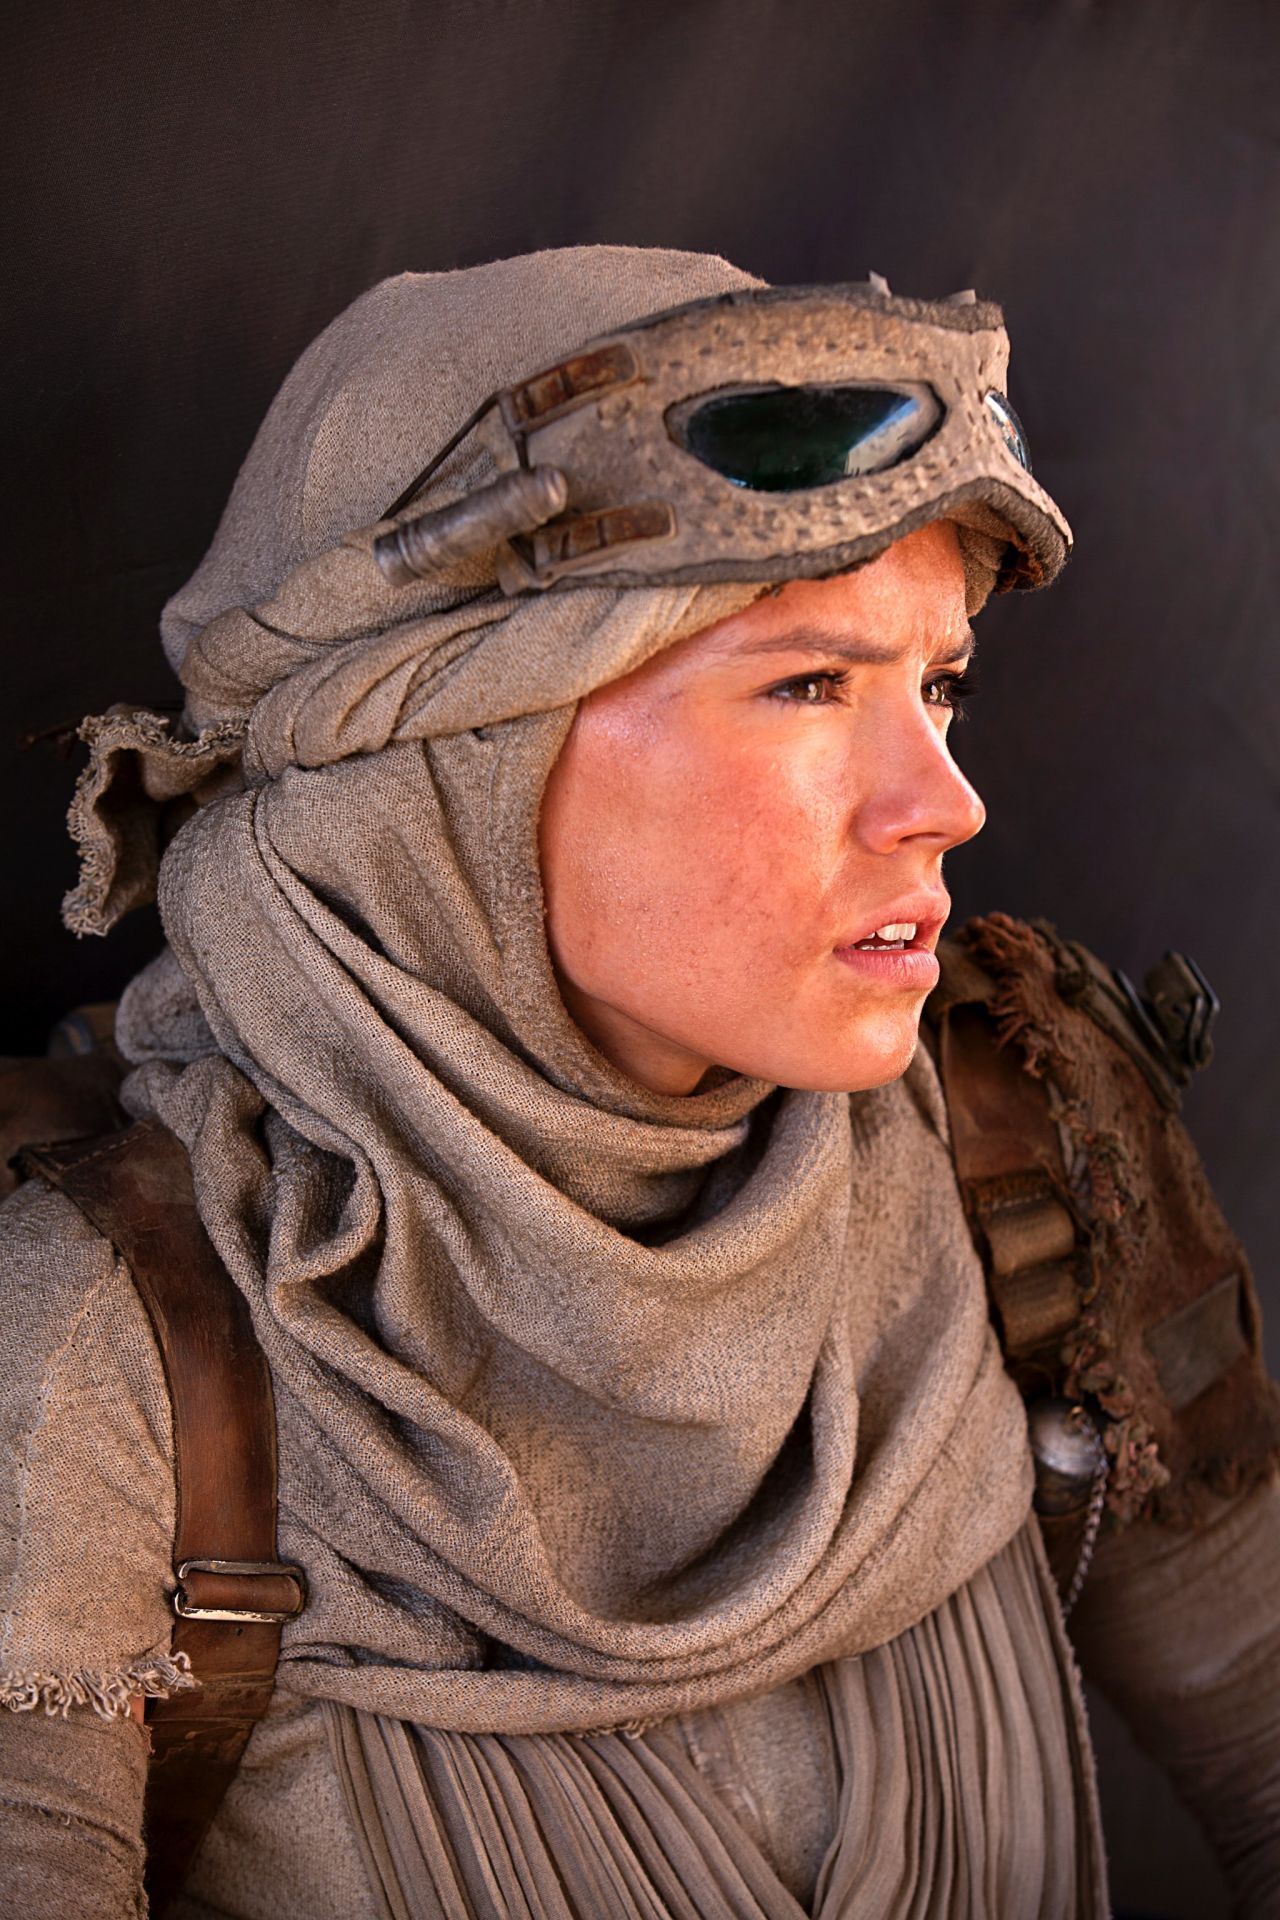 <strong>Rey</strong> (Daisy Ridley), a young scavenger on the desert planet of Jakku. The role is Ridley's first film, after minor appearances in British TV dramas including "Casualty" and "Silent Witness." Not all her parts have been glamorous; in one, she played a corpse.